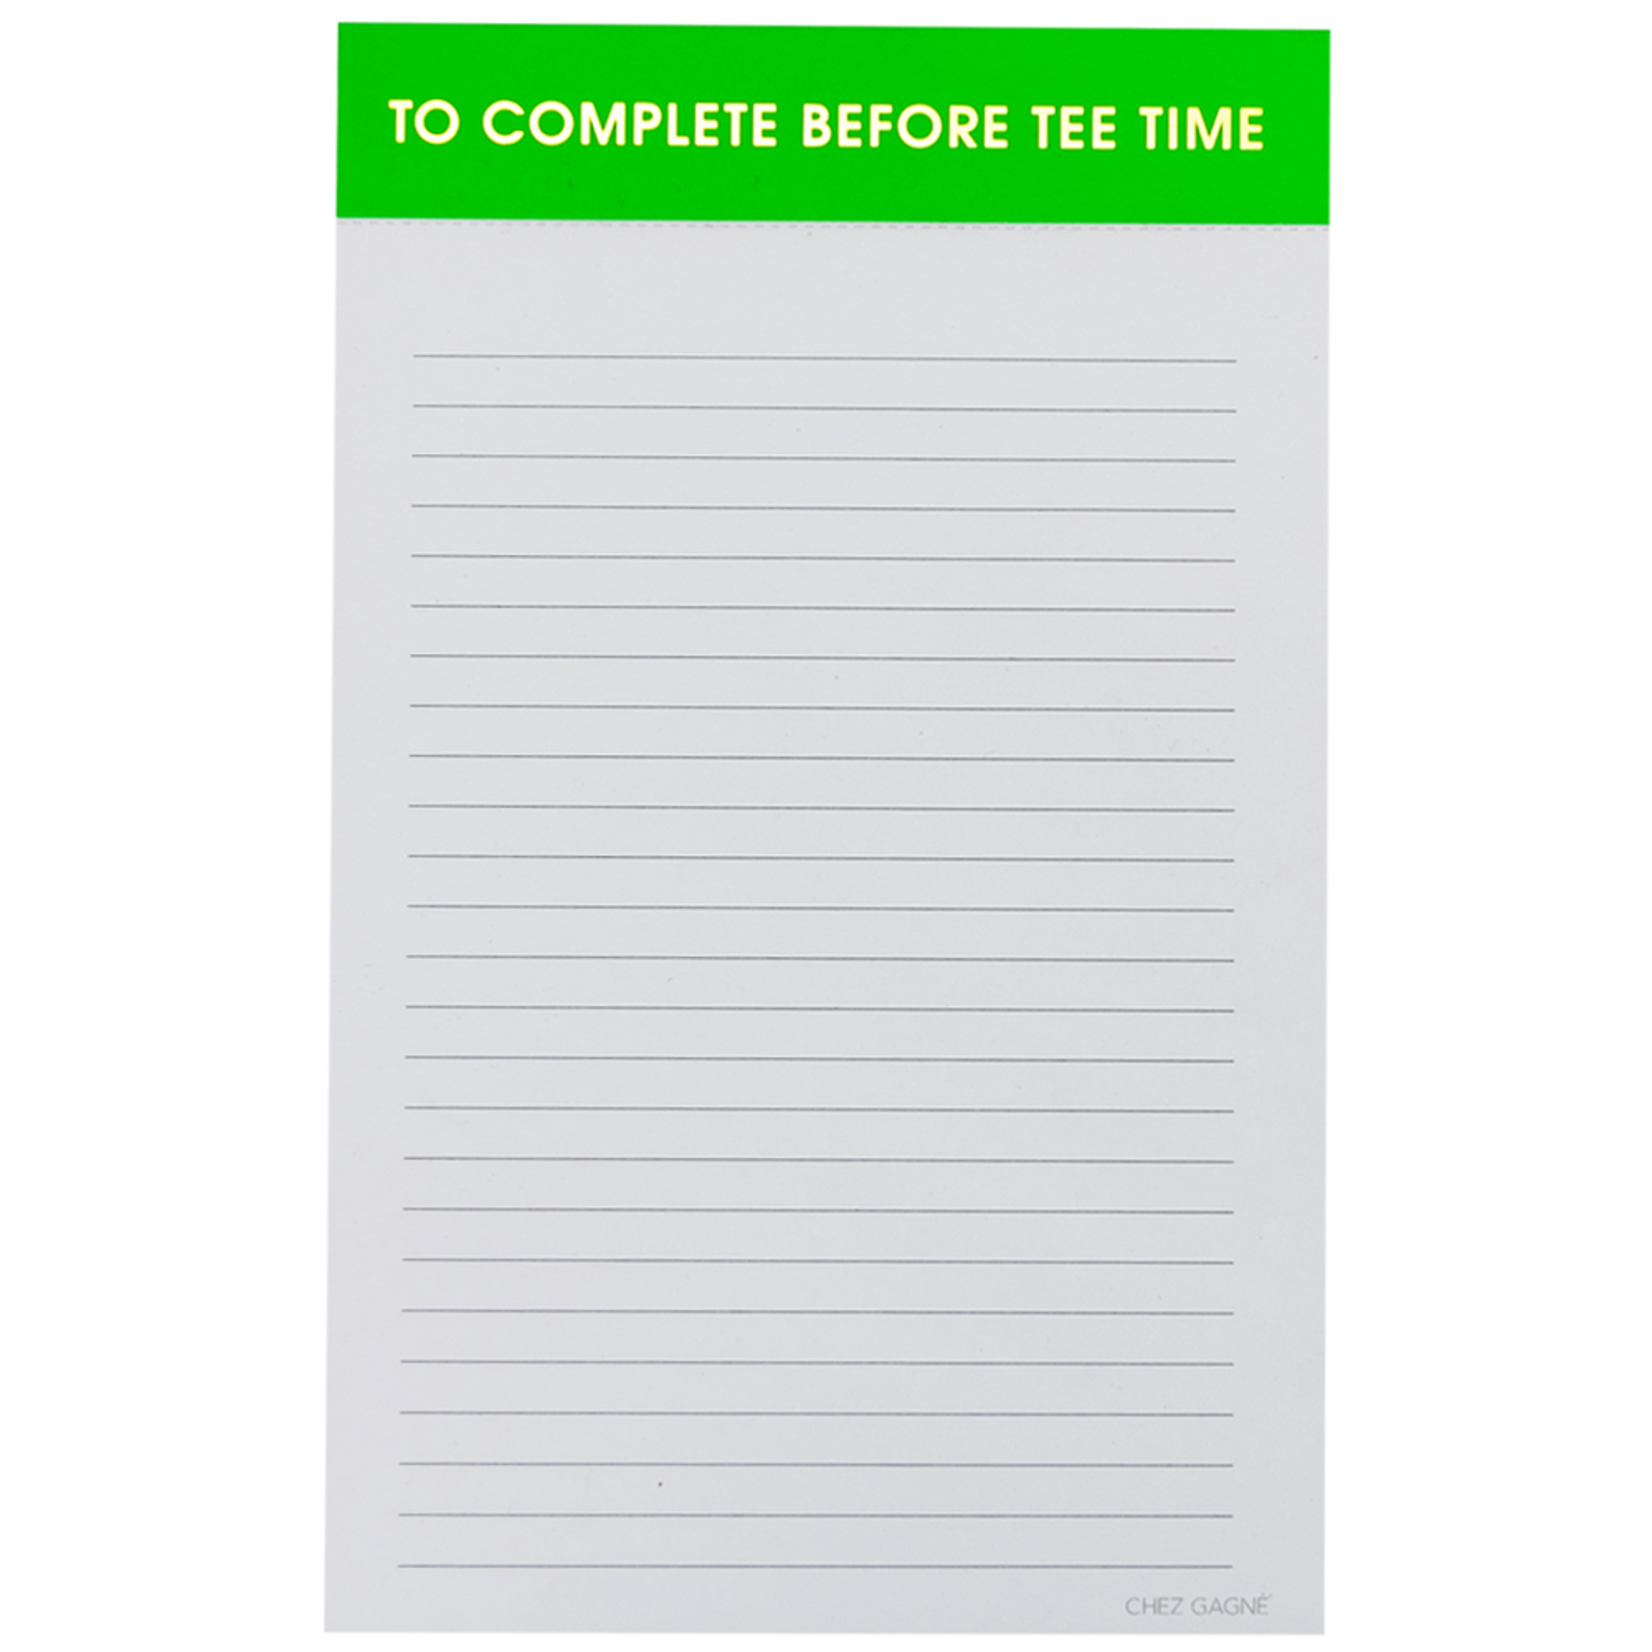 Chez Gagne Chez Gagne Complete Before Tee Time Notepad